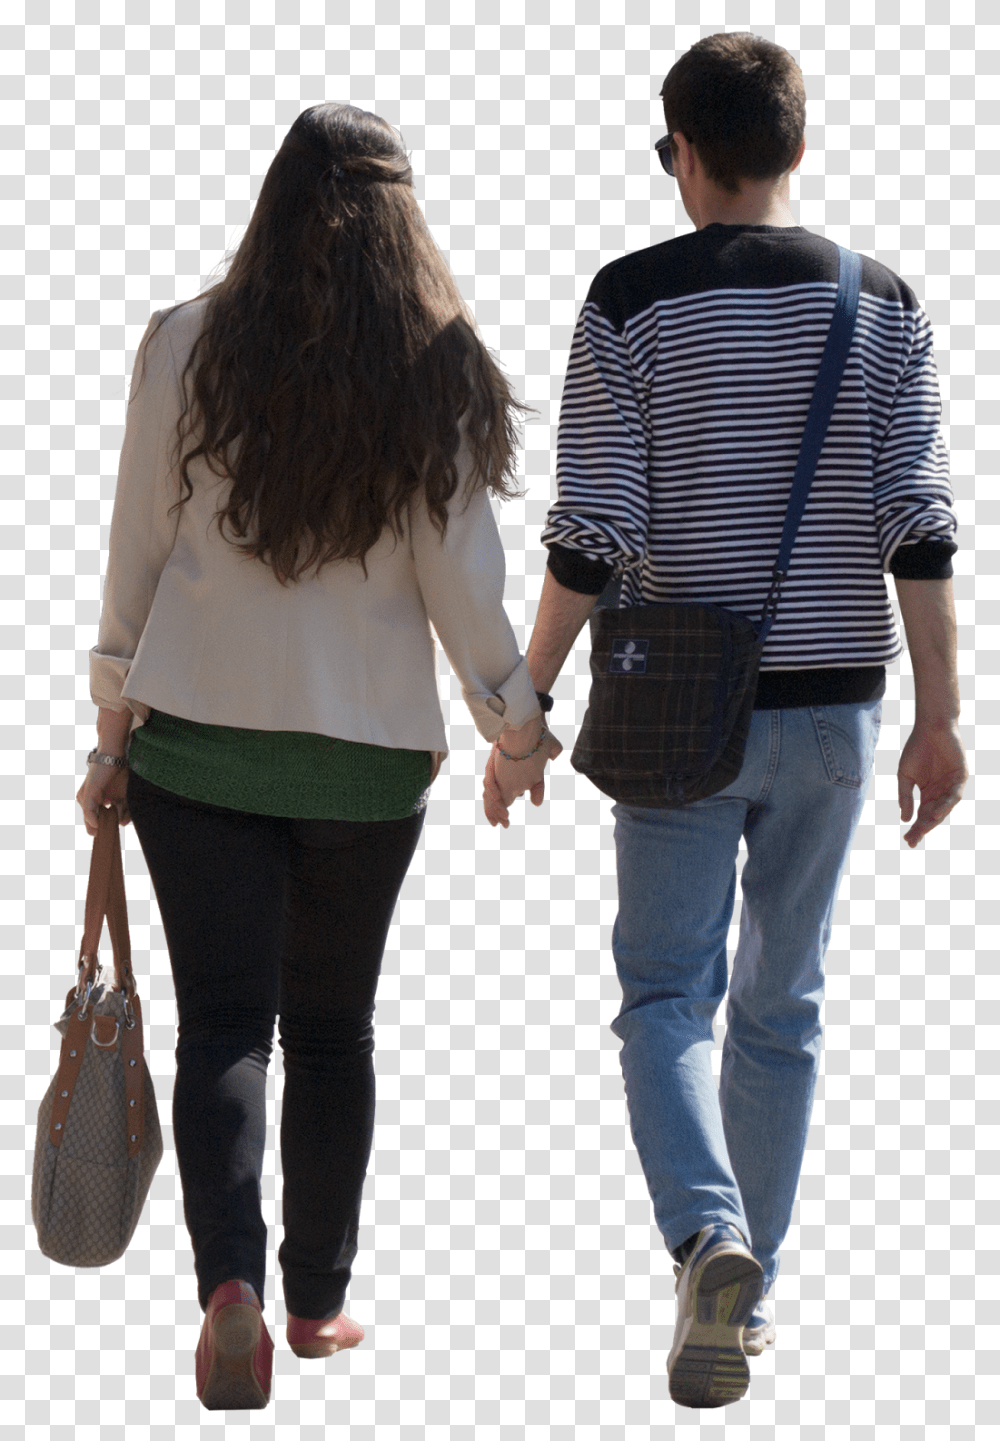 People Walking Cut Out People Couple003 Cut Out People Walking, Person, Human, Holding Hands Transparent Png